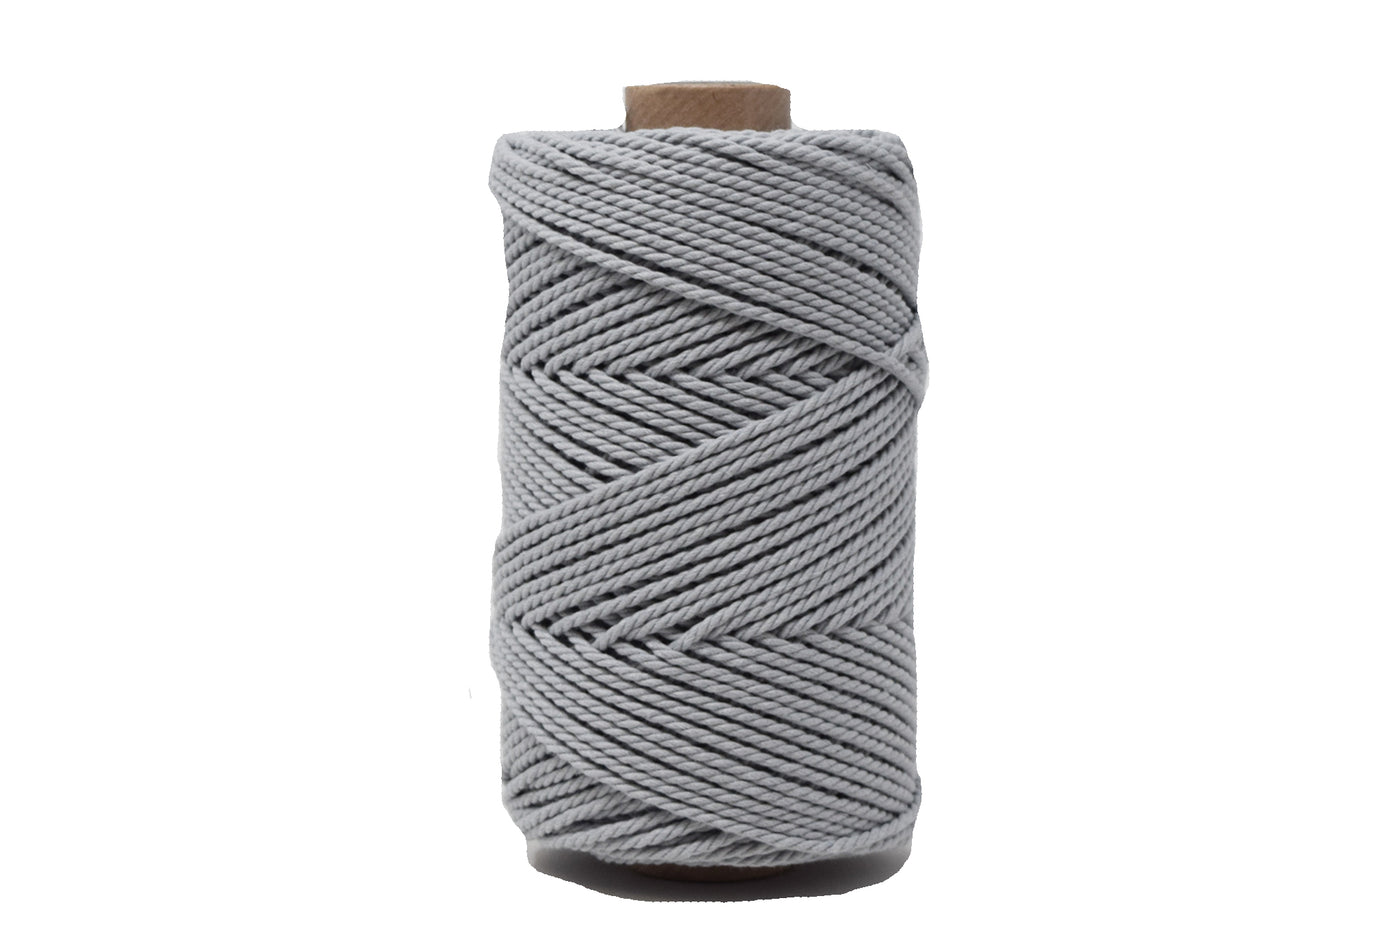 MACRAME COTTON ROPE 2 MM 3 PLY SOFT GRAY COLOR